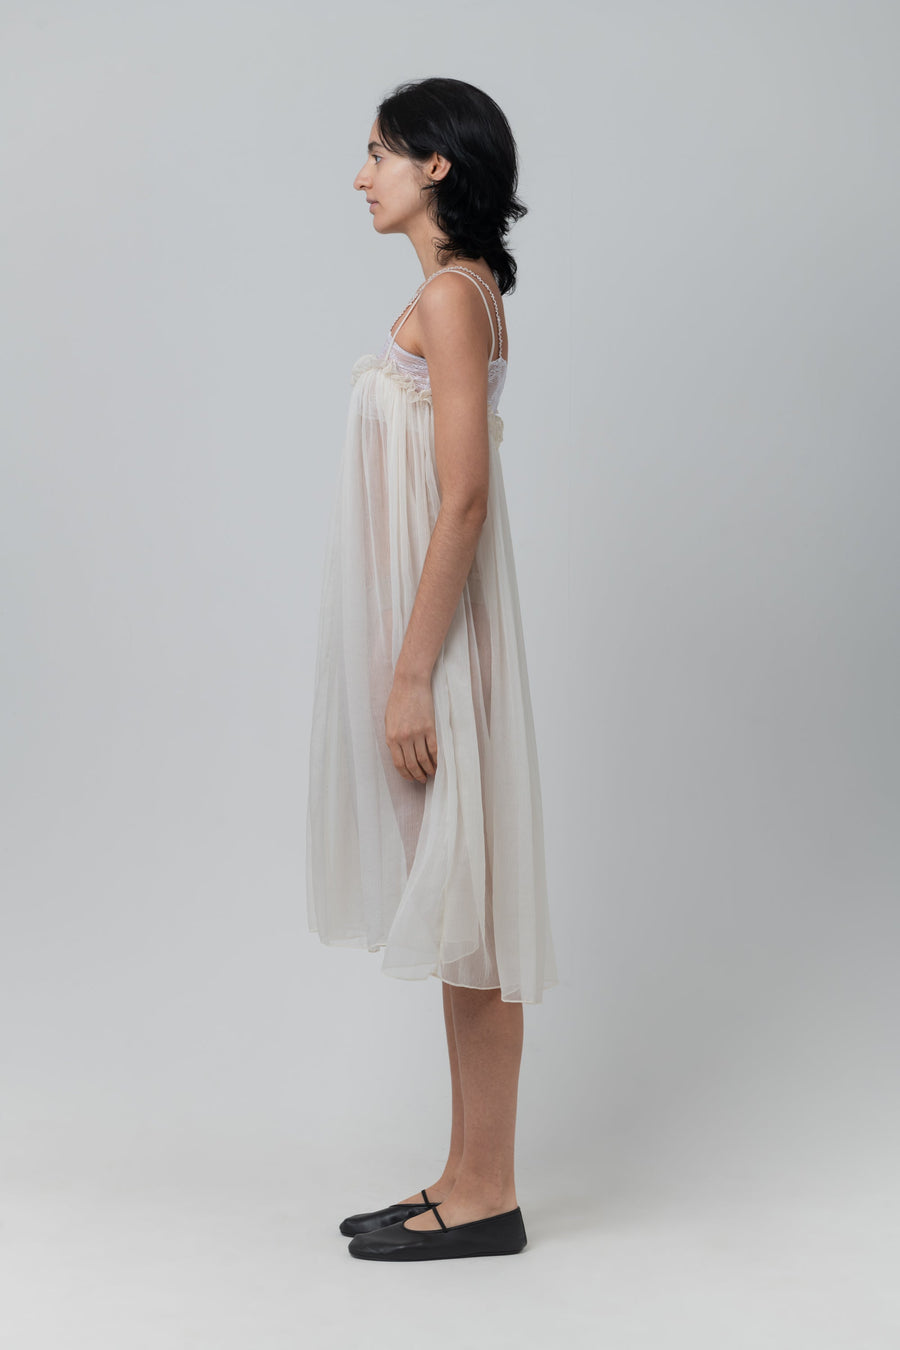 THE SUITCASE DRESS - WHITE